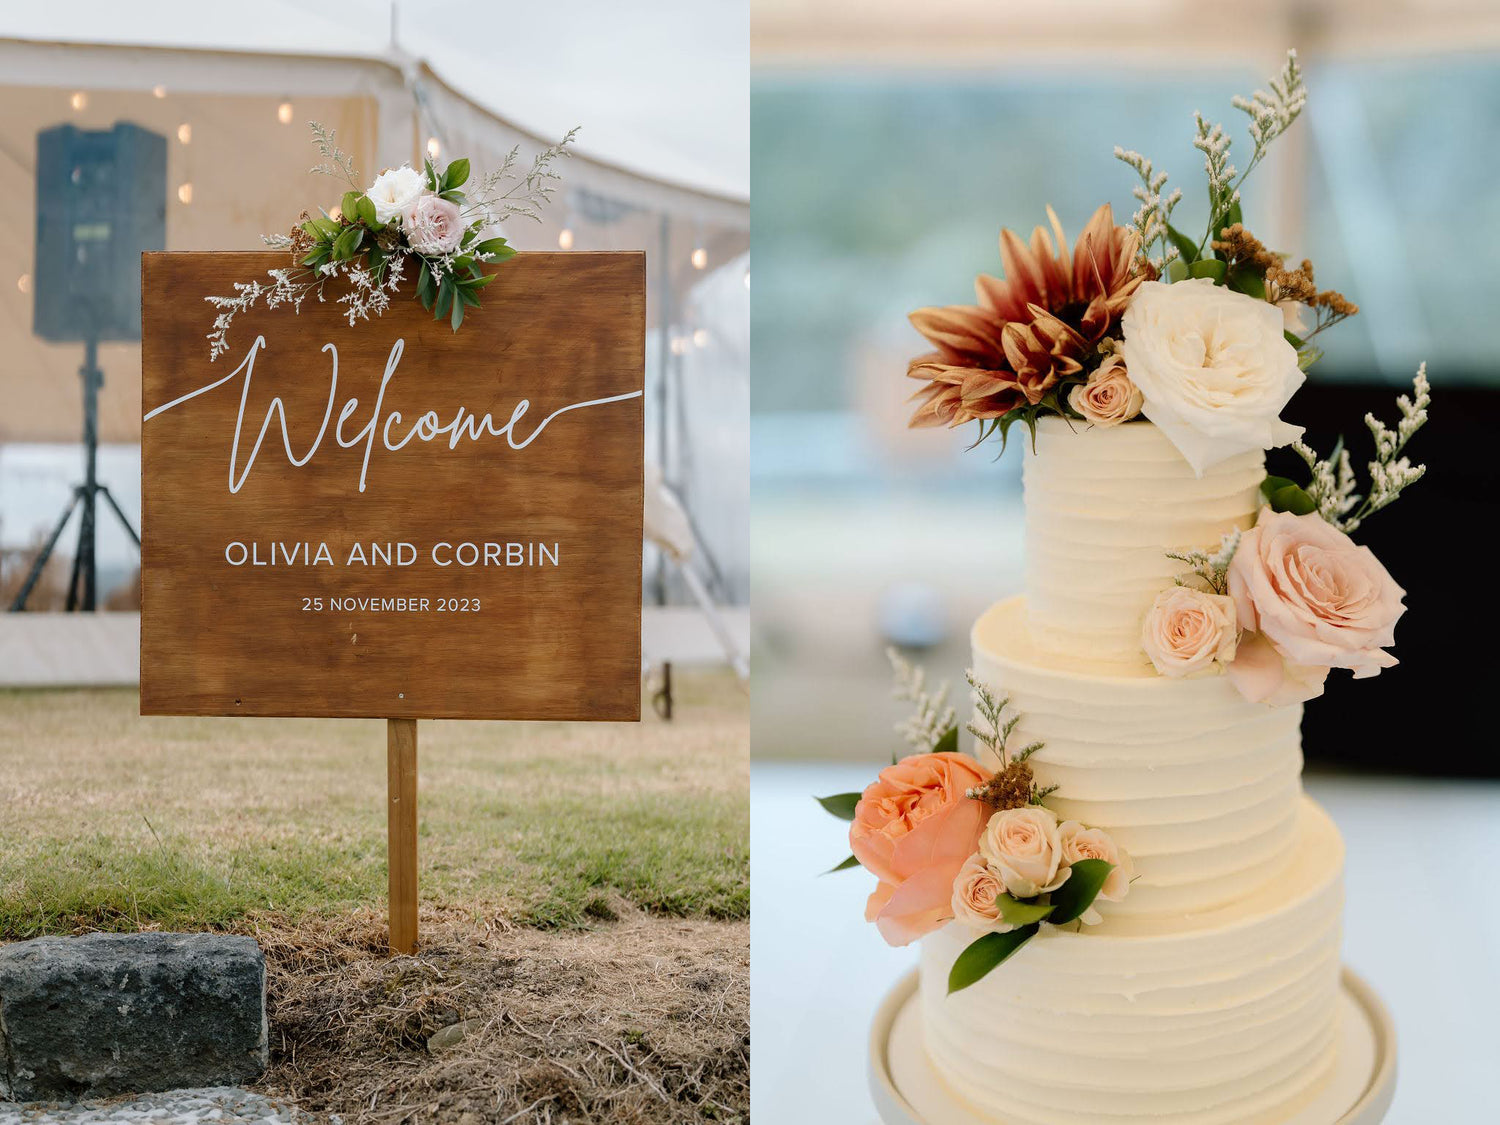 Wedding sign and cake with beautiful fresh flowers